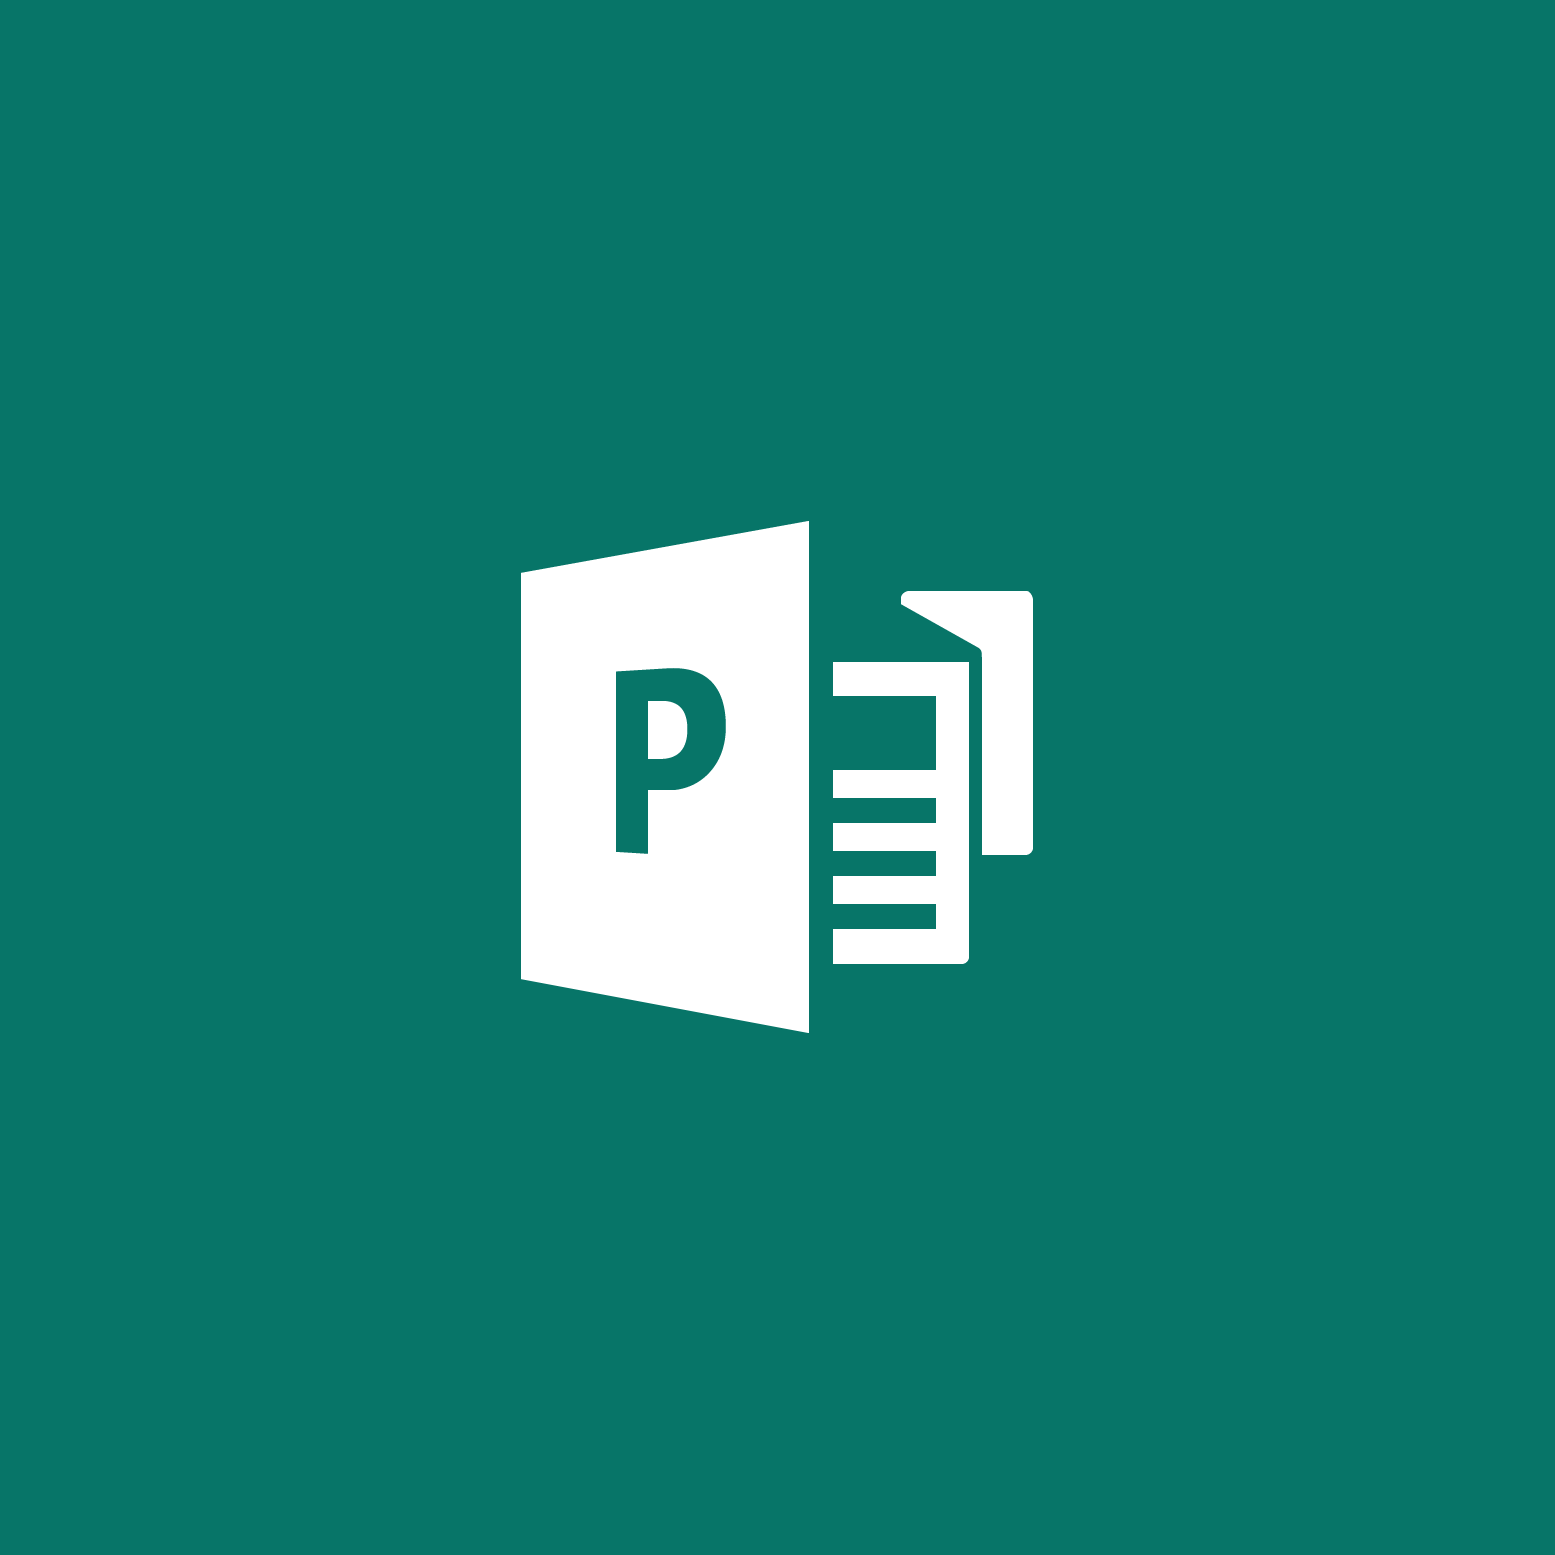 microsoft publisher 2013 download free trial